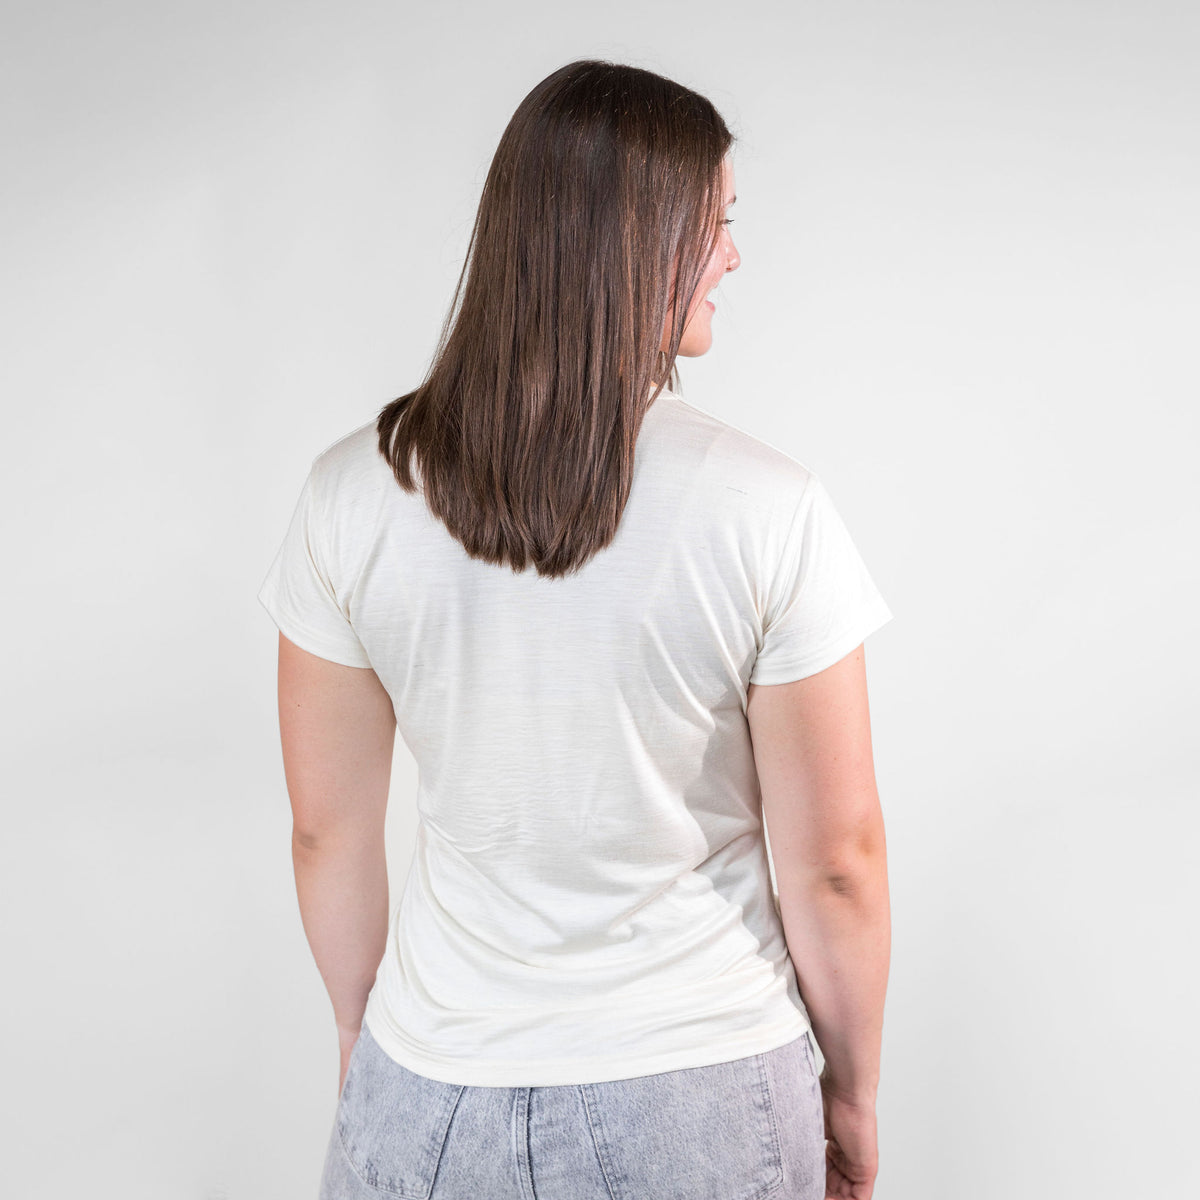 A brown haired woman facing away from the camera against a white background. She is wearing gray jeans and a natural white Alpacas of Montana lightweight athletic activewear outerwear breathable moisture wicking antimicrobial soft comfortable exercise short sleeve alpaca women&#39;s performance tee for running sports exercise work out hiking climbing camping biking